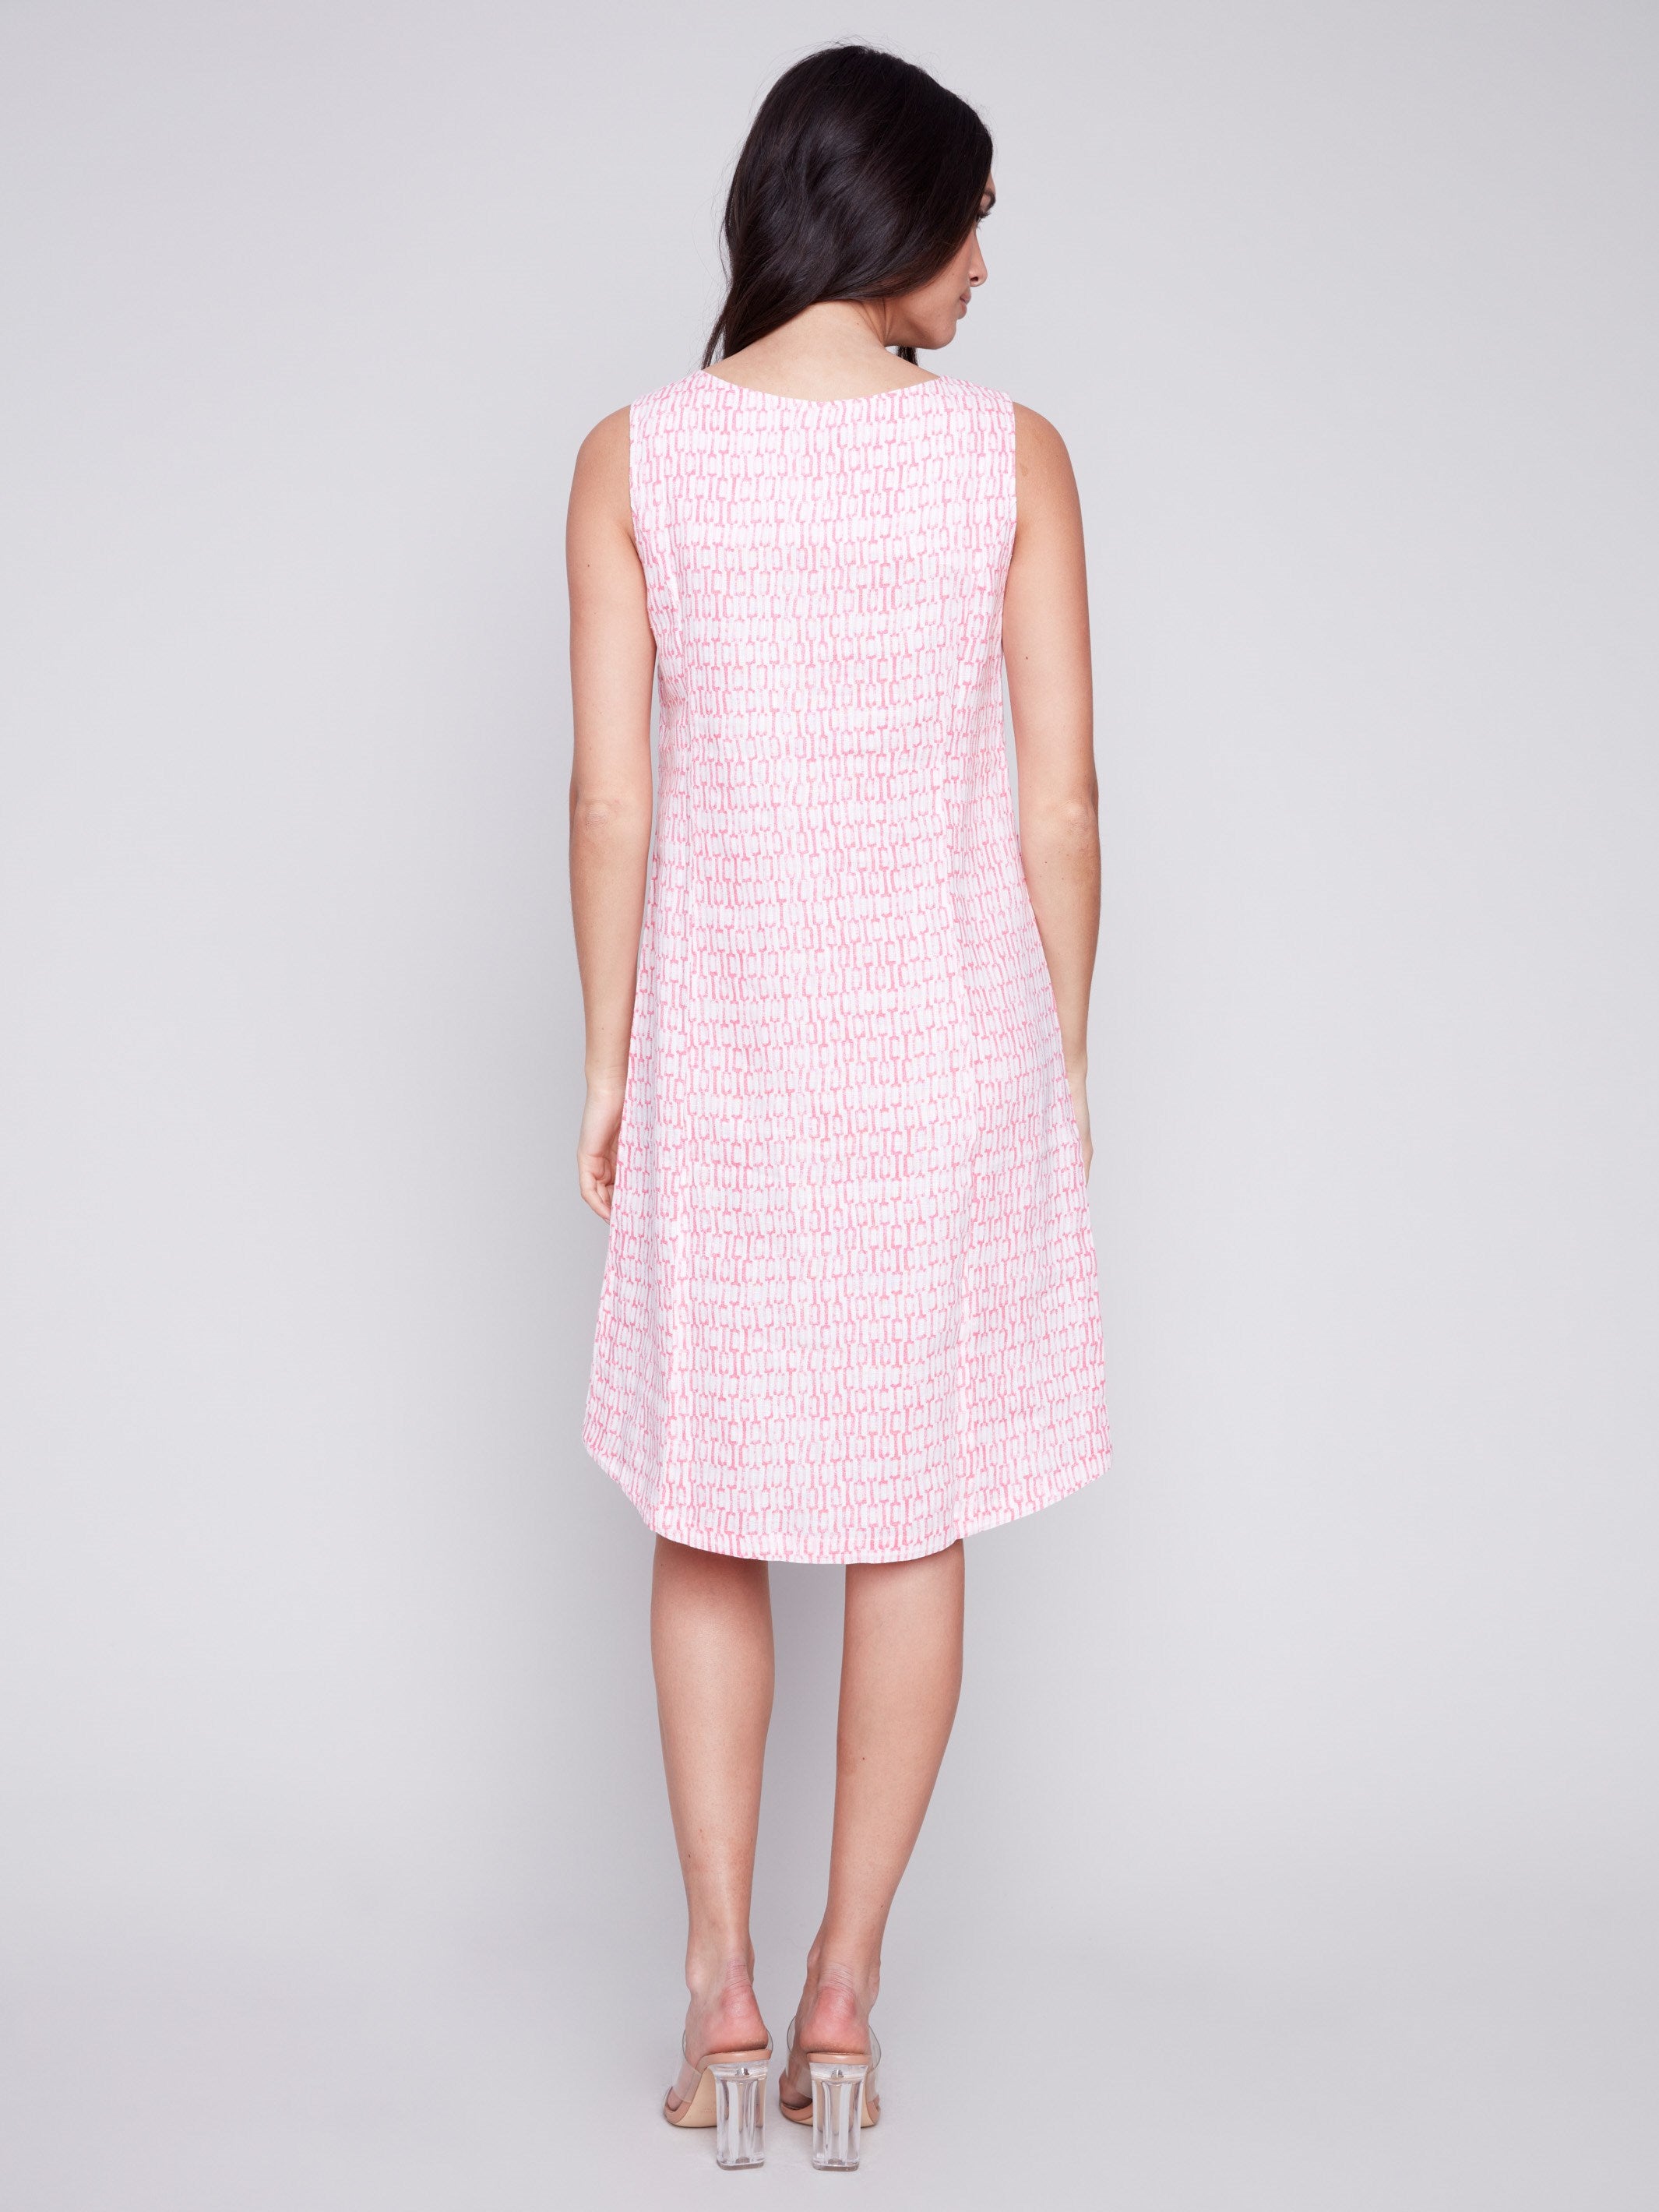 Sleeveless Printed A-Line Linen Dress - Flamingo - Charlie B Collection Canada - Image 3